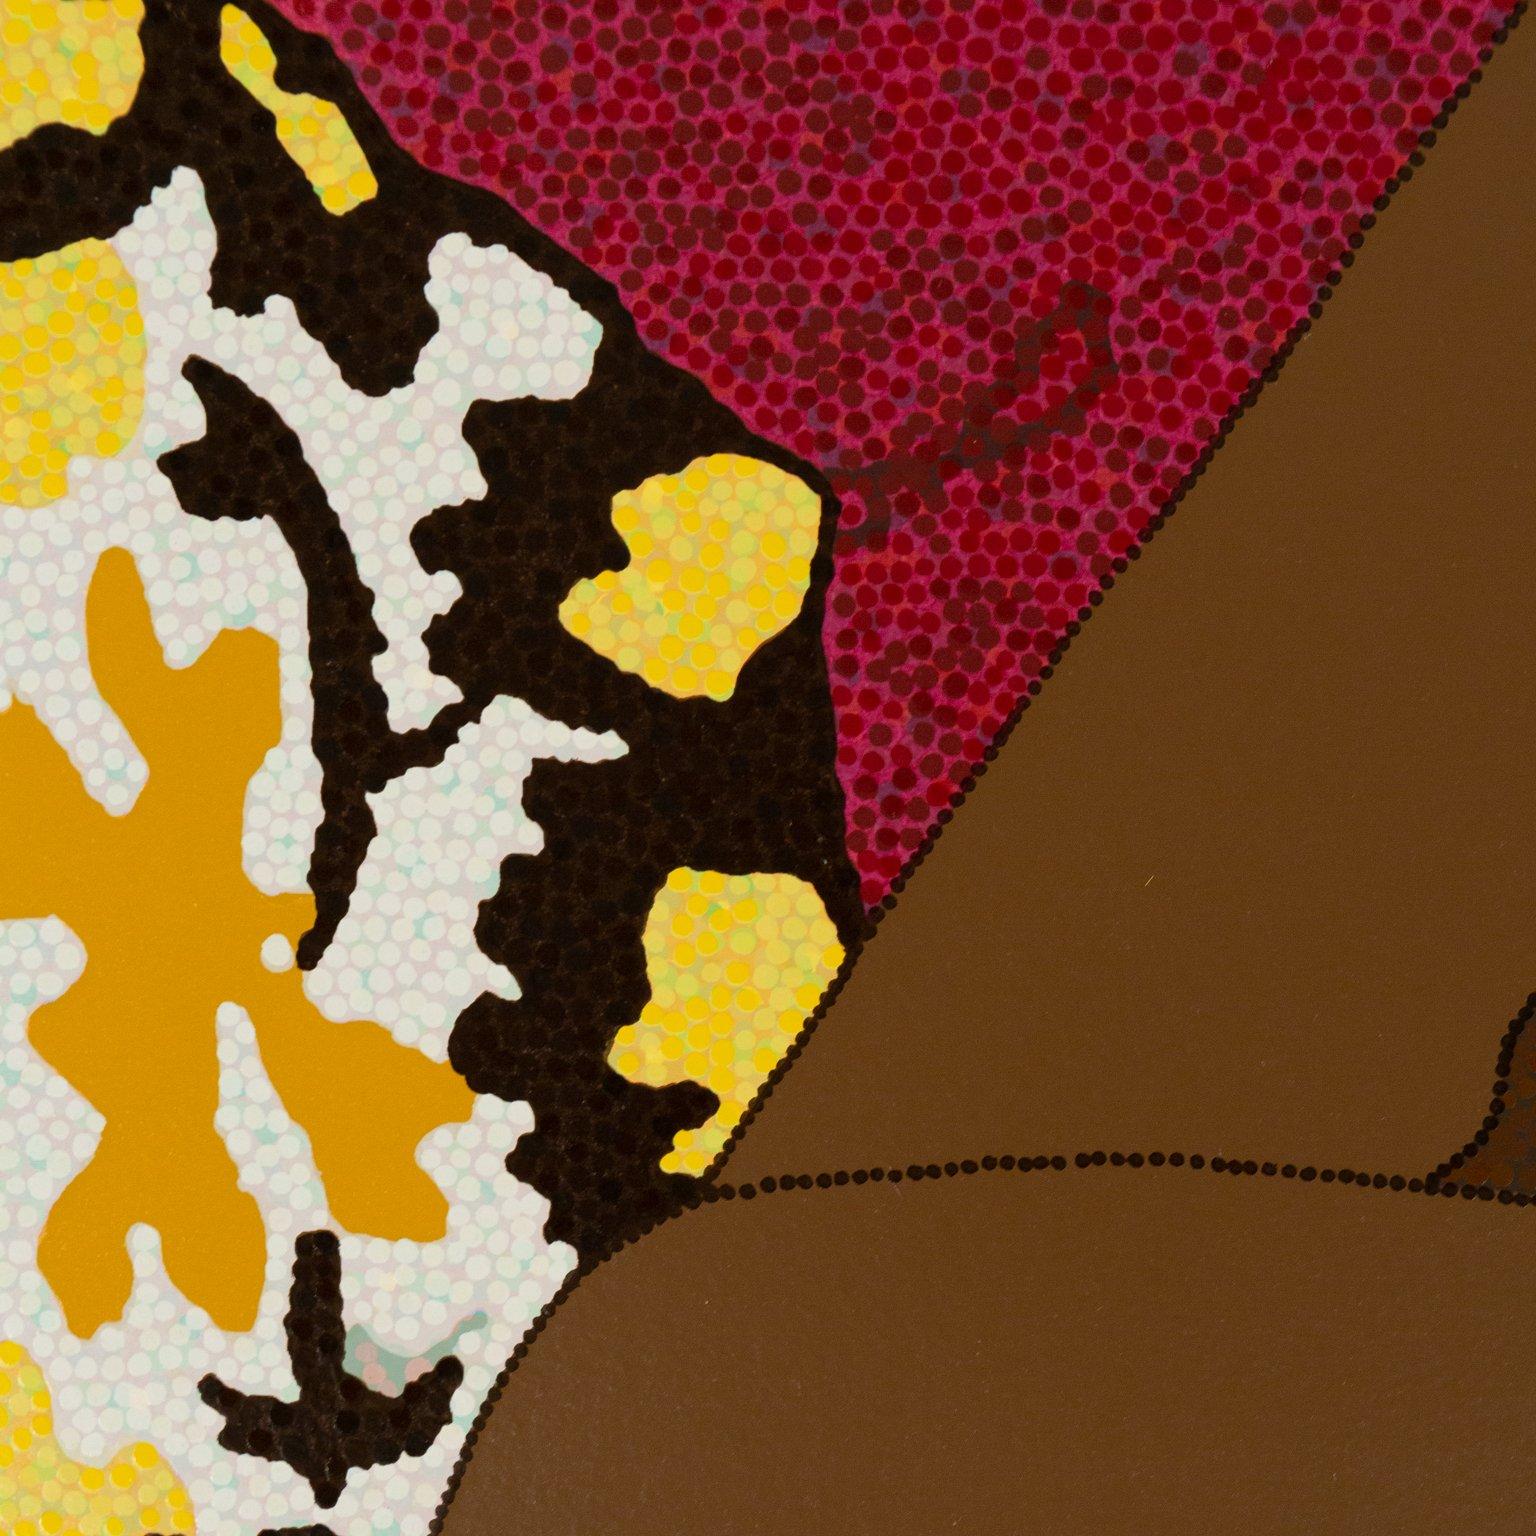 Why Can't We Just Sit Down and Talk It Over? - Contemporary Print by Mickalene Thomas